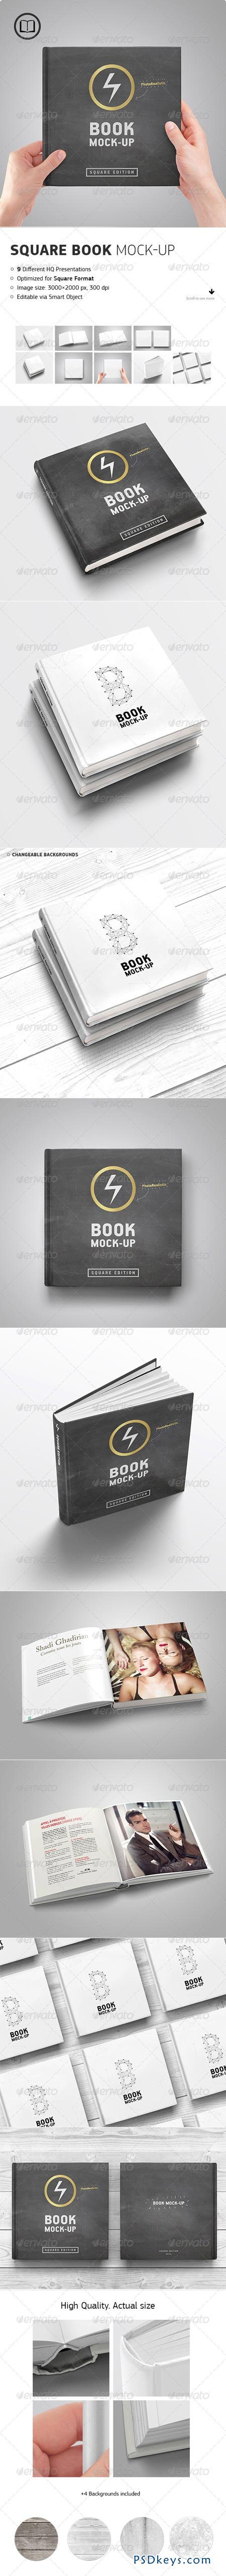 Square Book Mock-Up 8720820